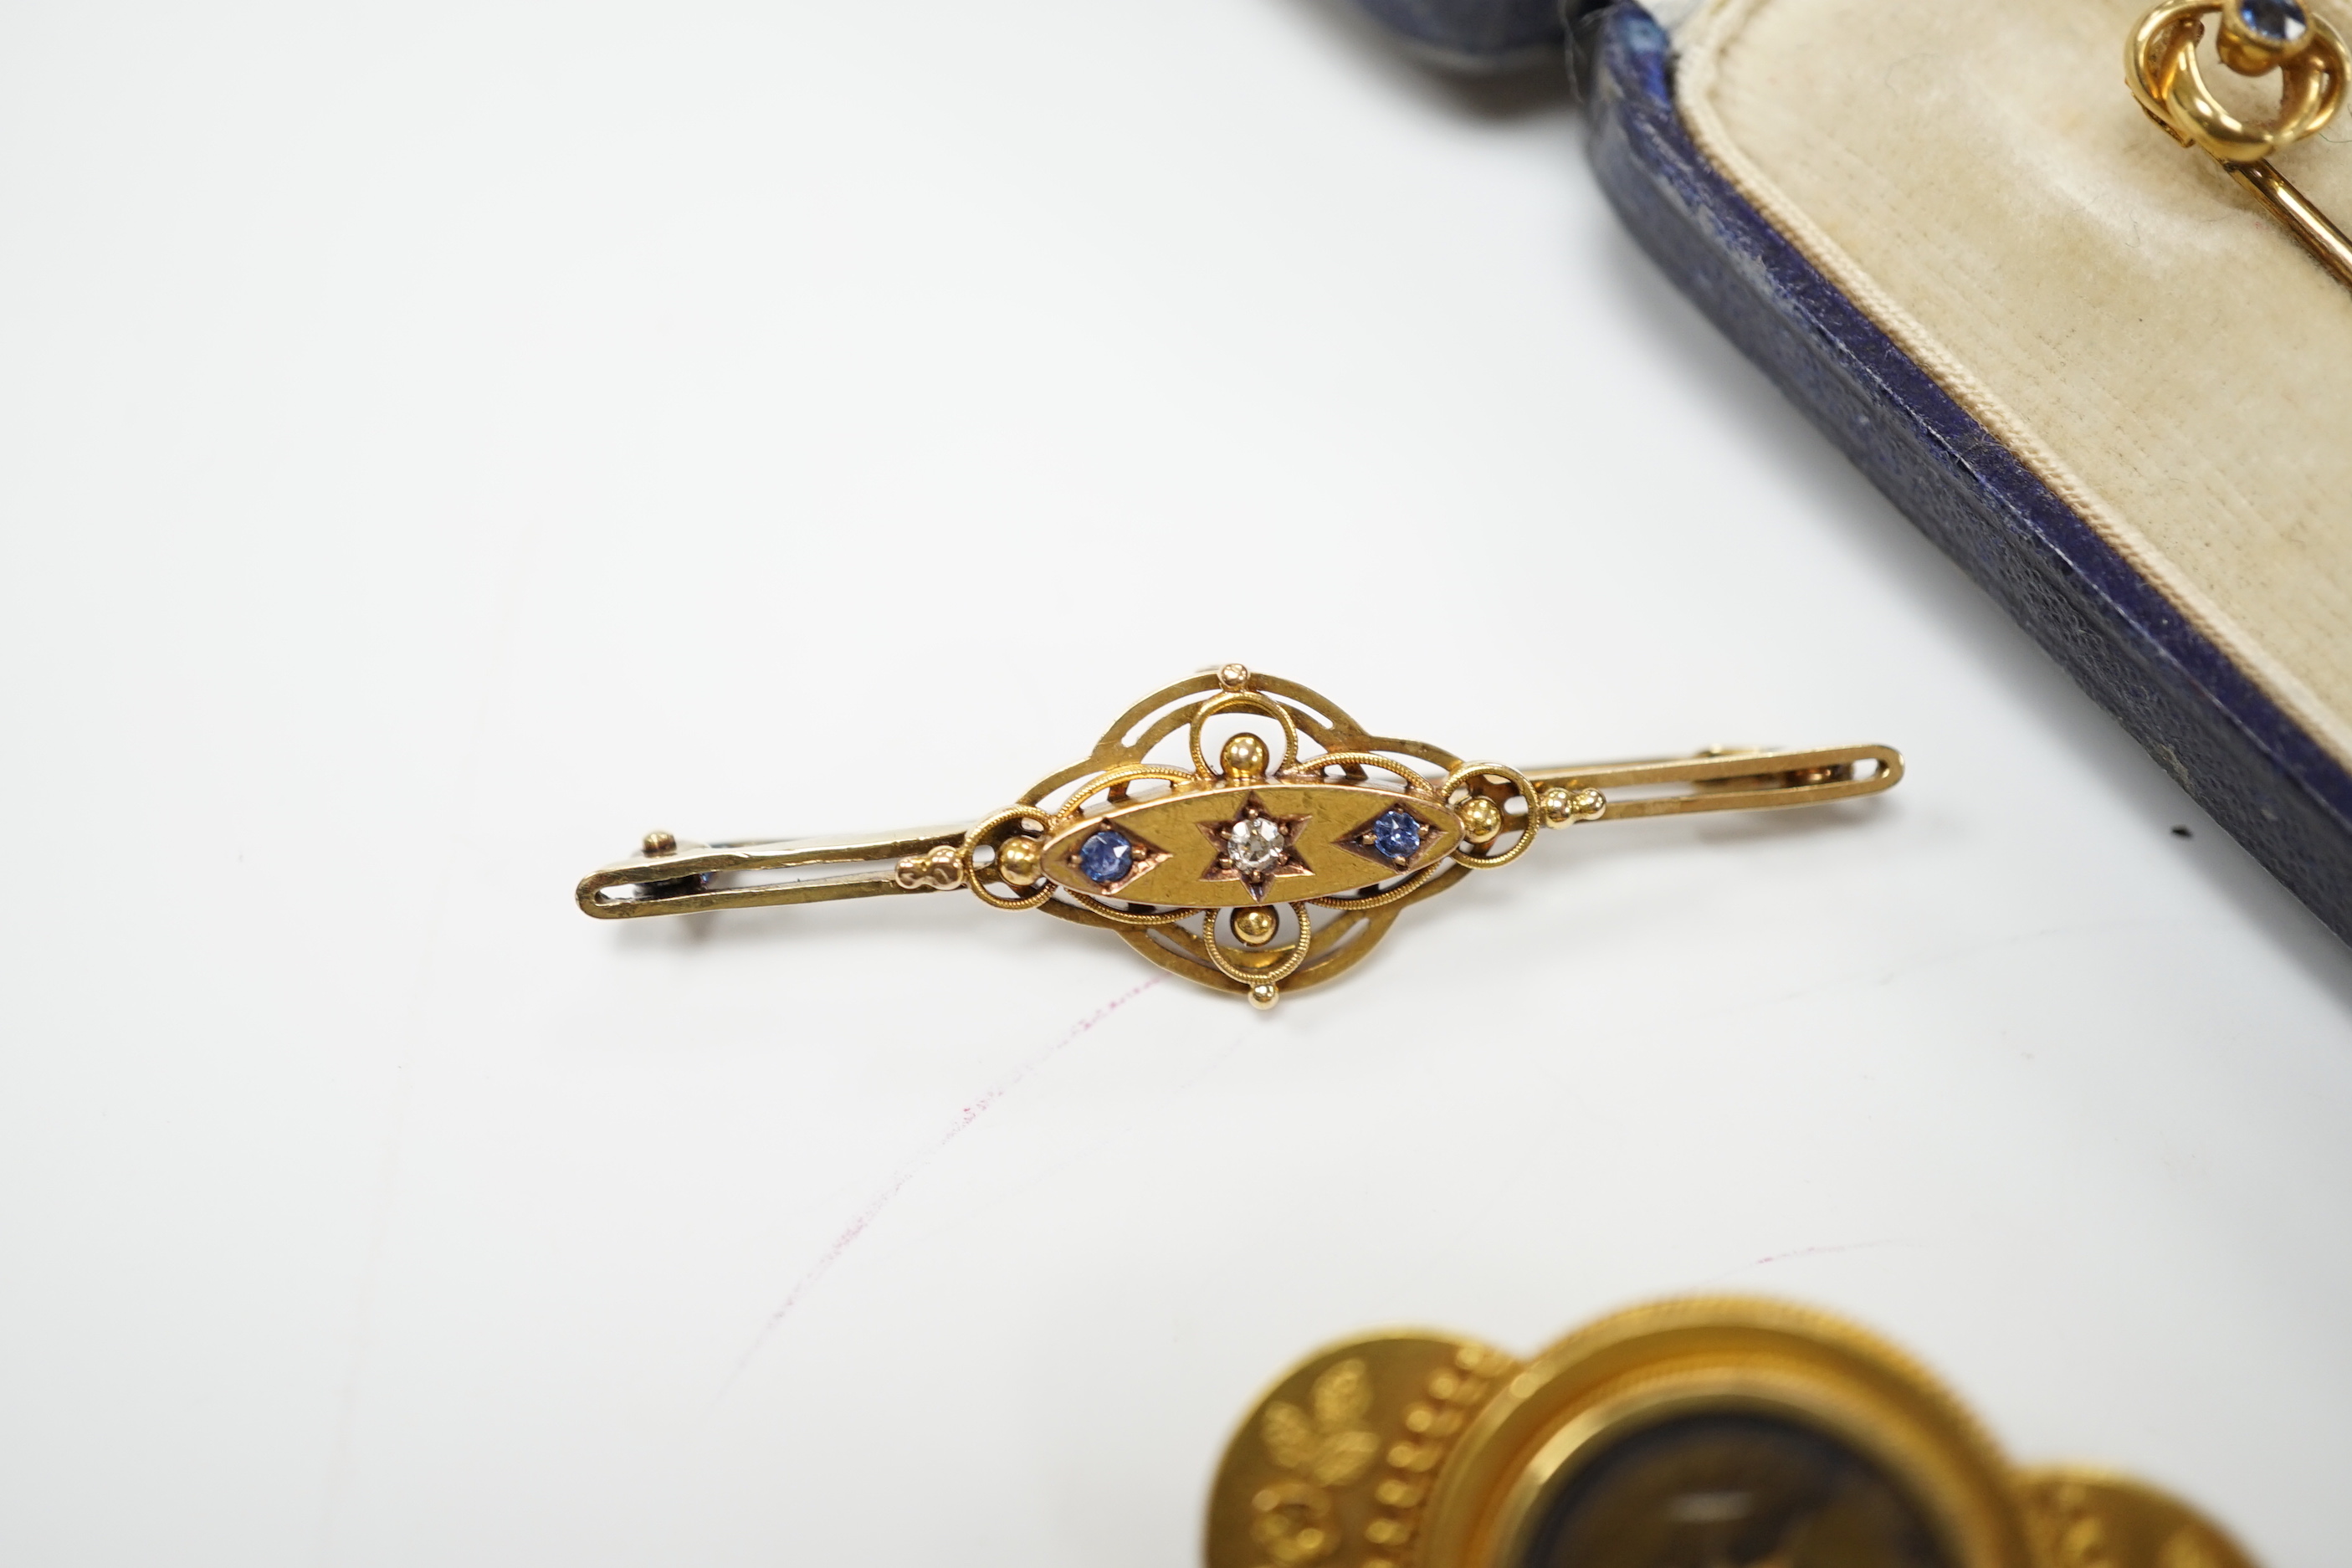 An Edwardian 15ct, sapphire and diamond set three stone bar brooch, 48mm, a later 14ct gold enamel and baroque pearls set 'Kingfisher' bar brooch, one other yellow metal and seed pearl set brooch and an Edwardian 15ct an